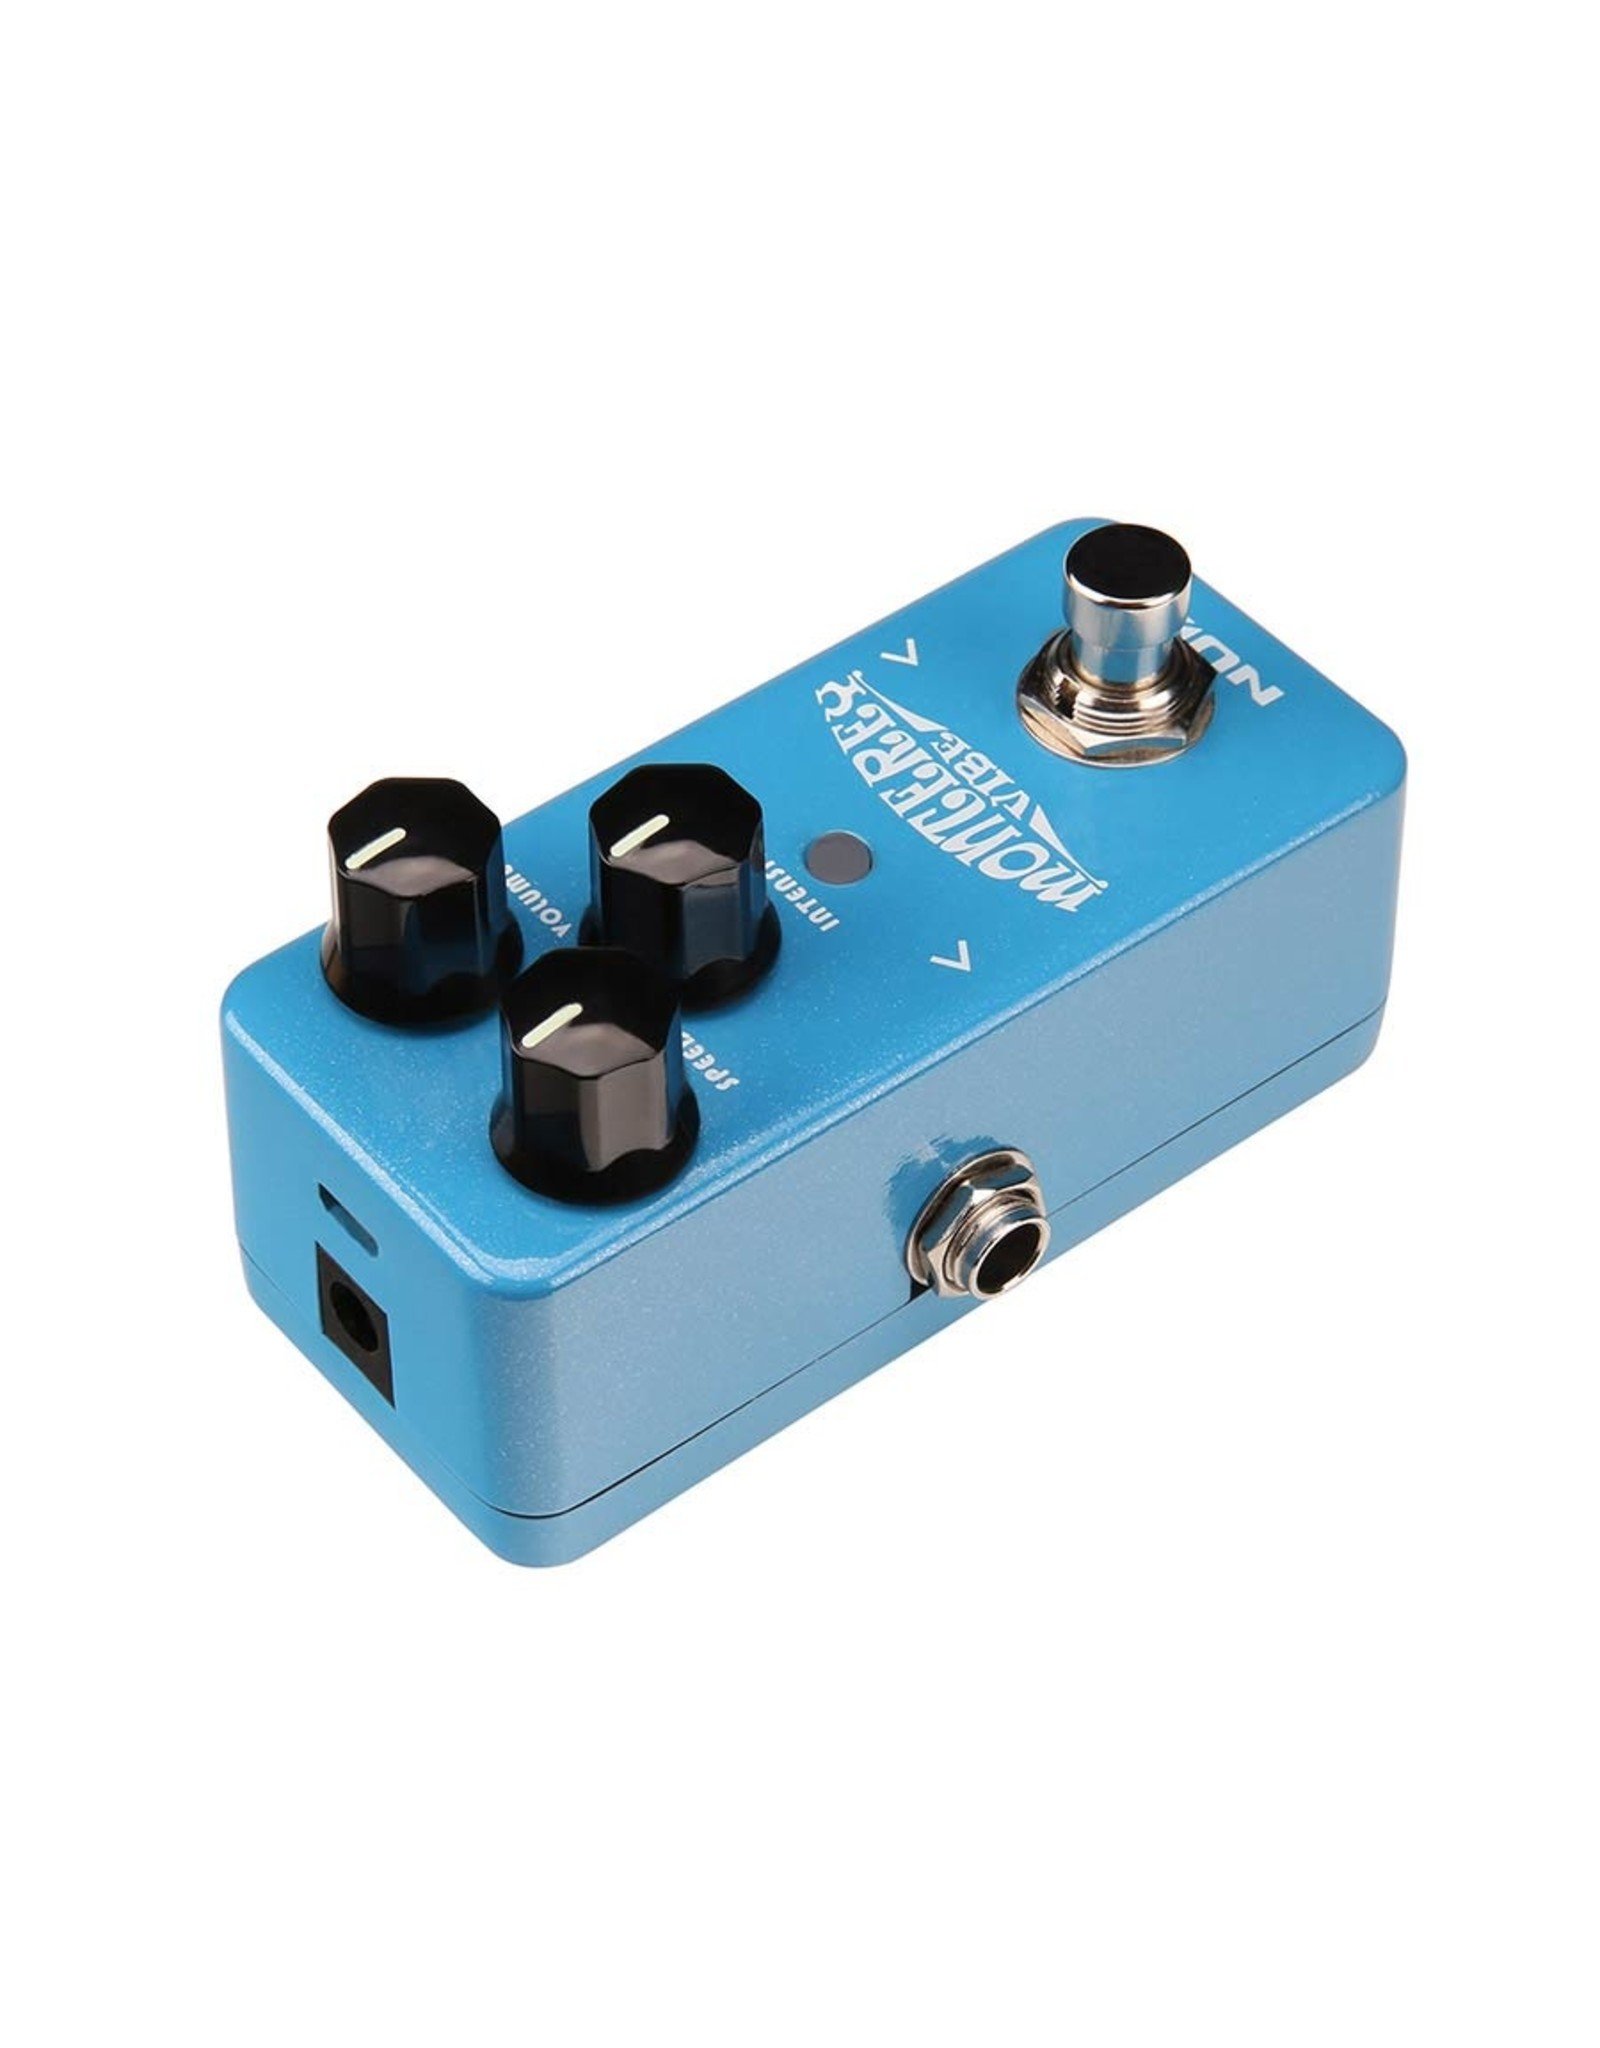 NUX Nux Monterey Vibe Rotary Pedal